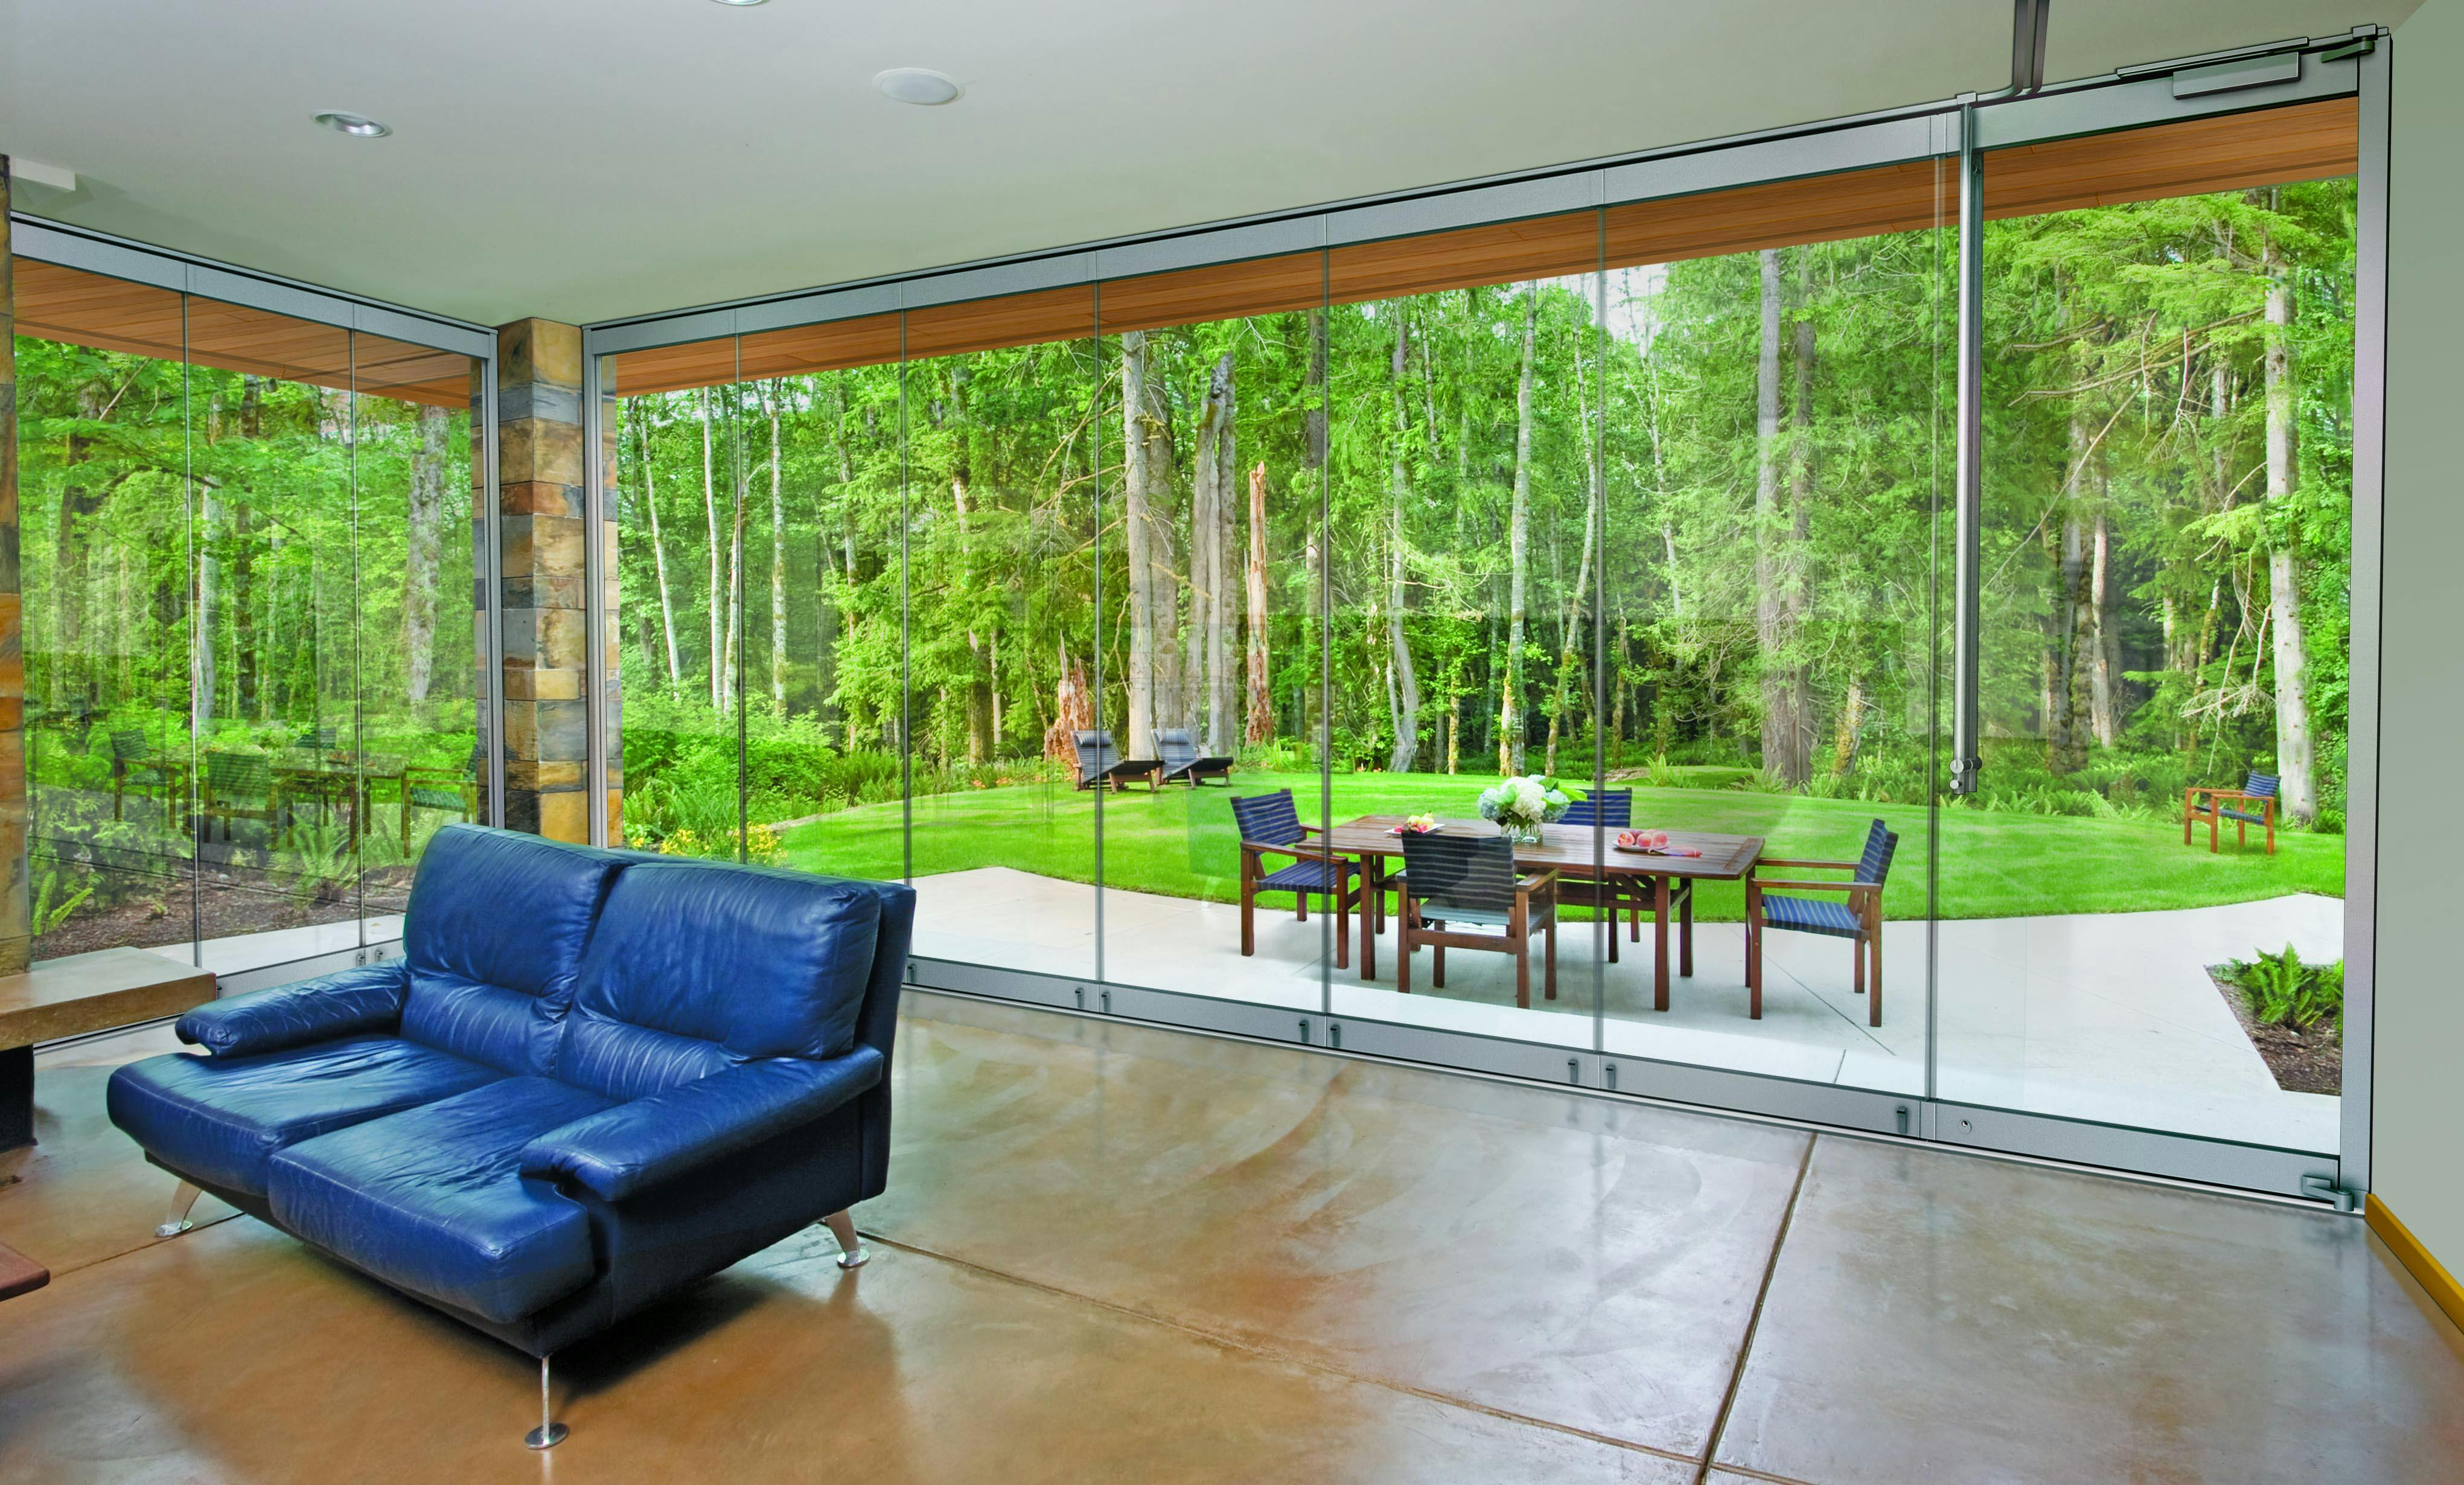 ClimaCLEAR frameless glass walls enclose an indoor/outdoor living space